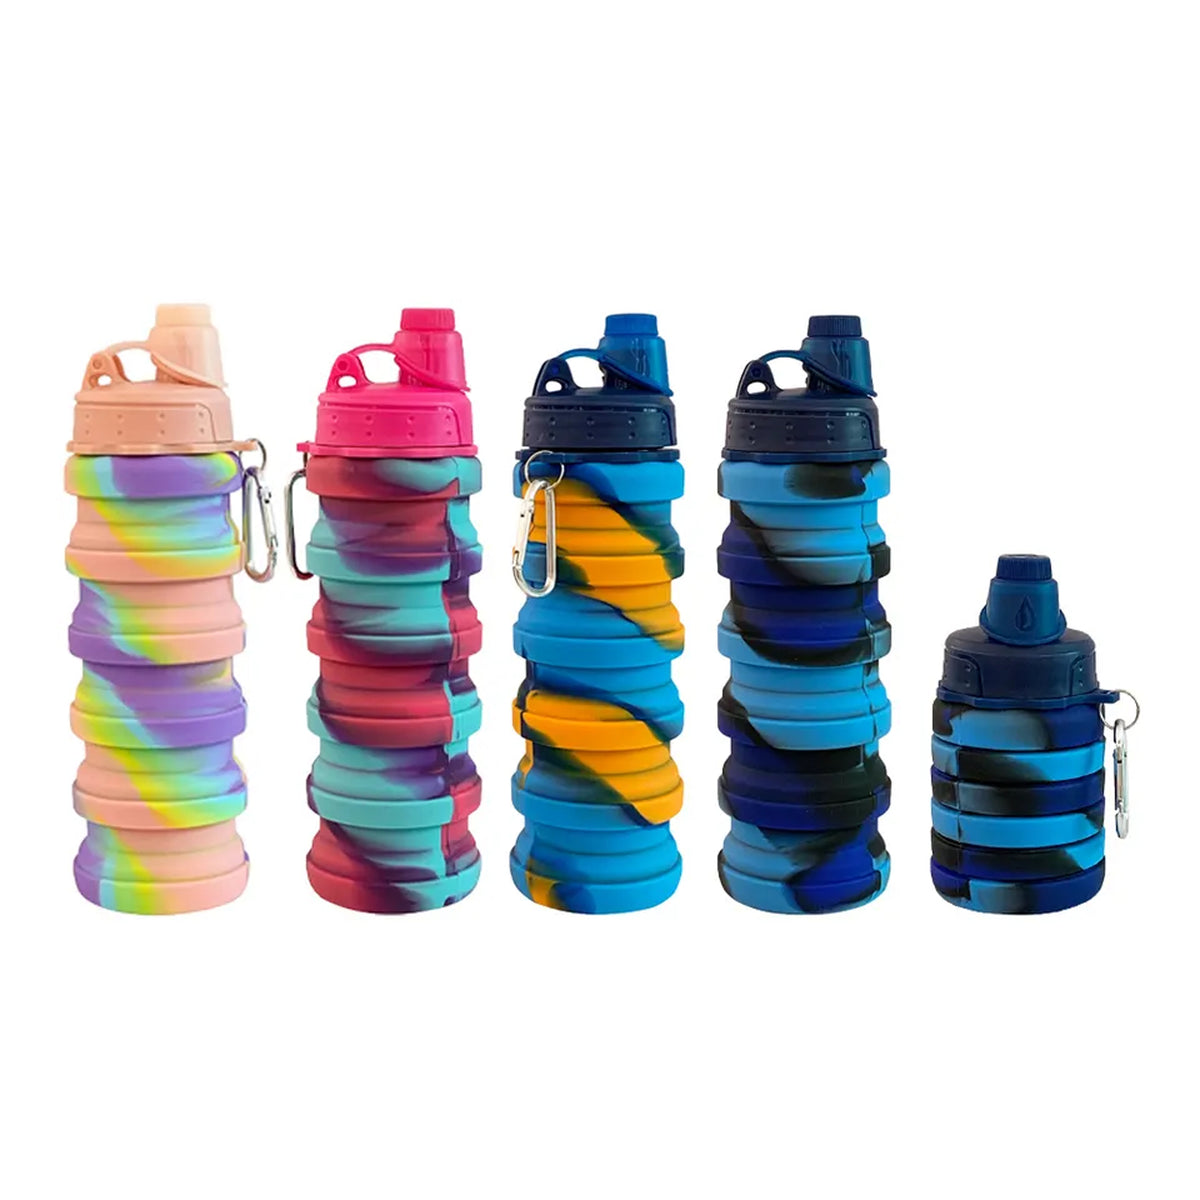 Travel Water Bottles Portable Hiking Reusable Silicone Unbreakable For Girls & Boys - Assorted